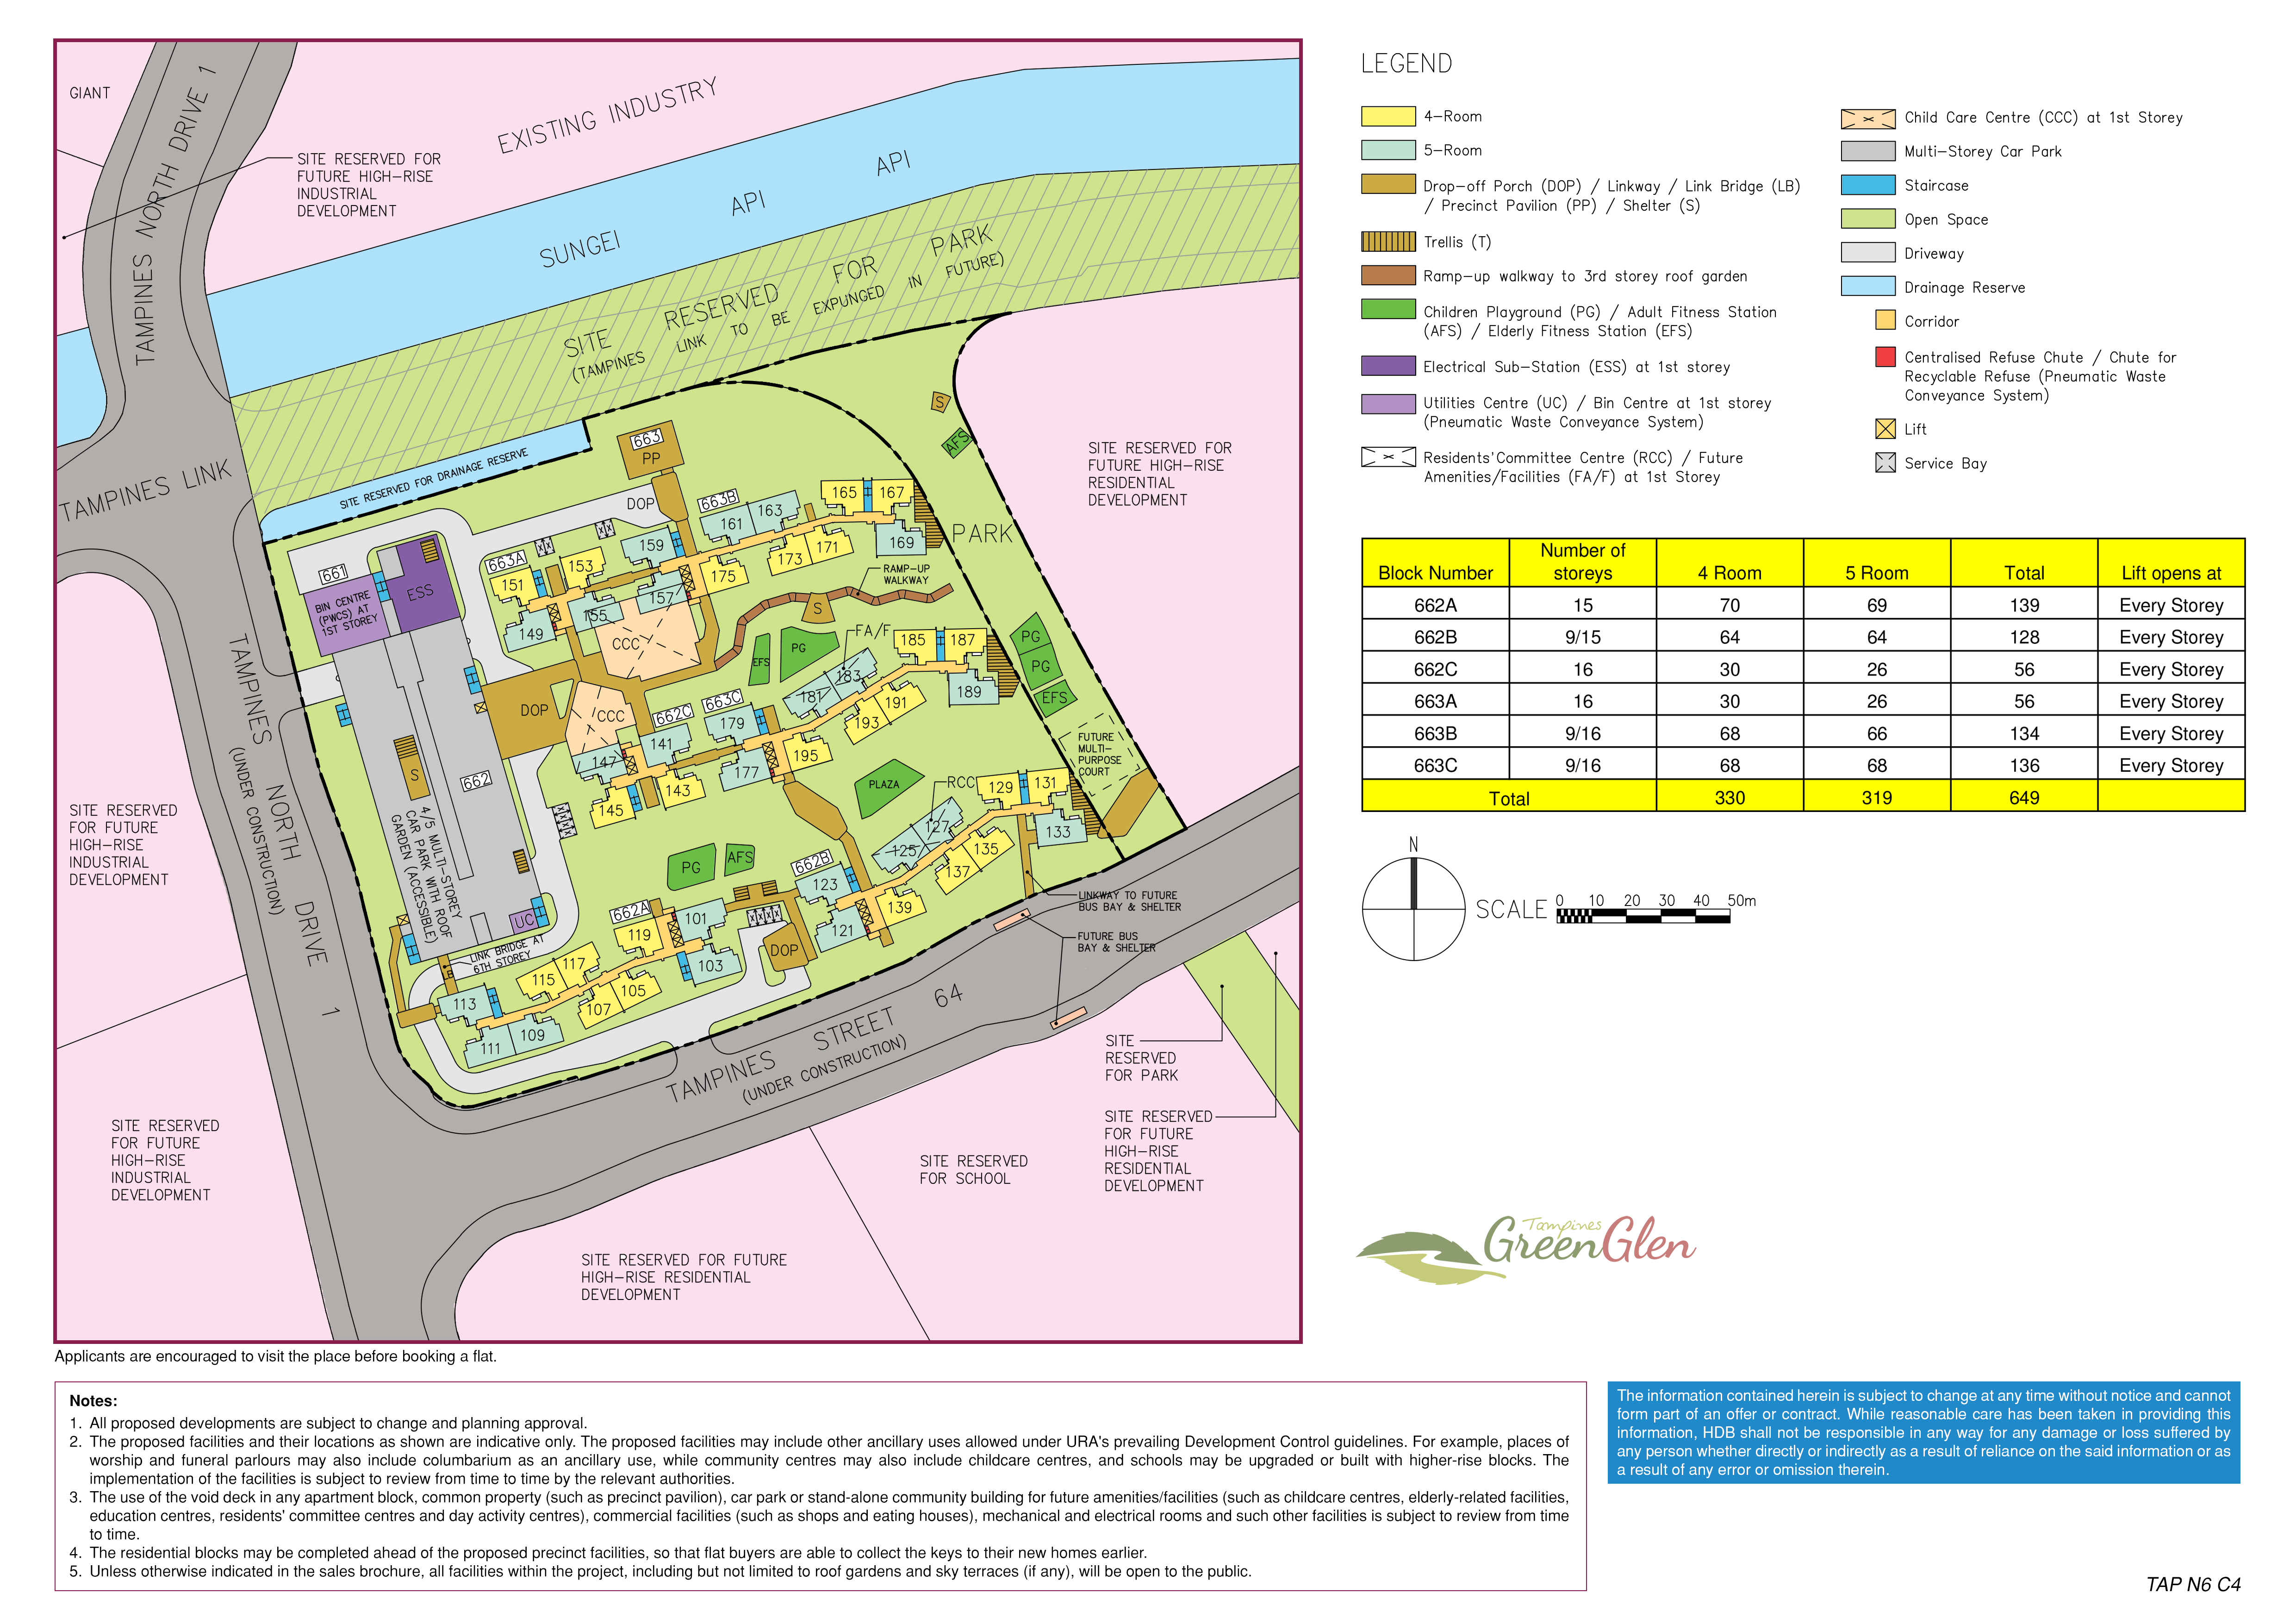 Site Plan of Tampines Green Glen. Photo by HDB